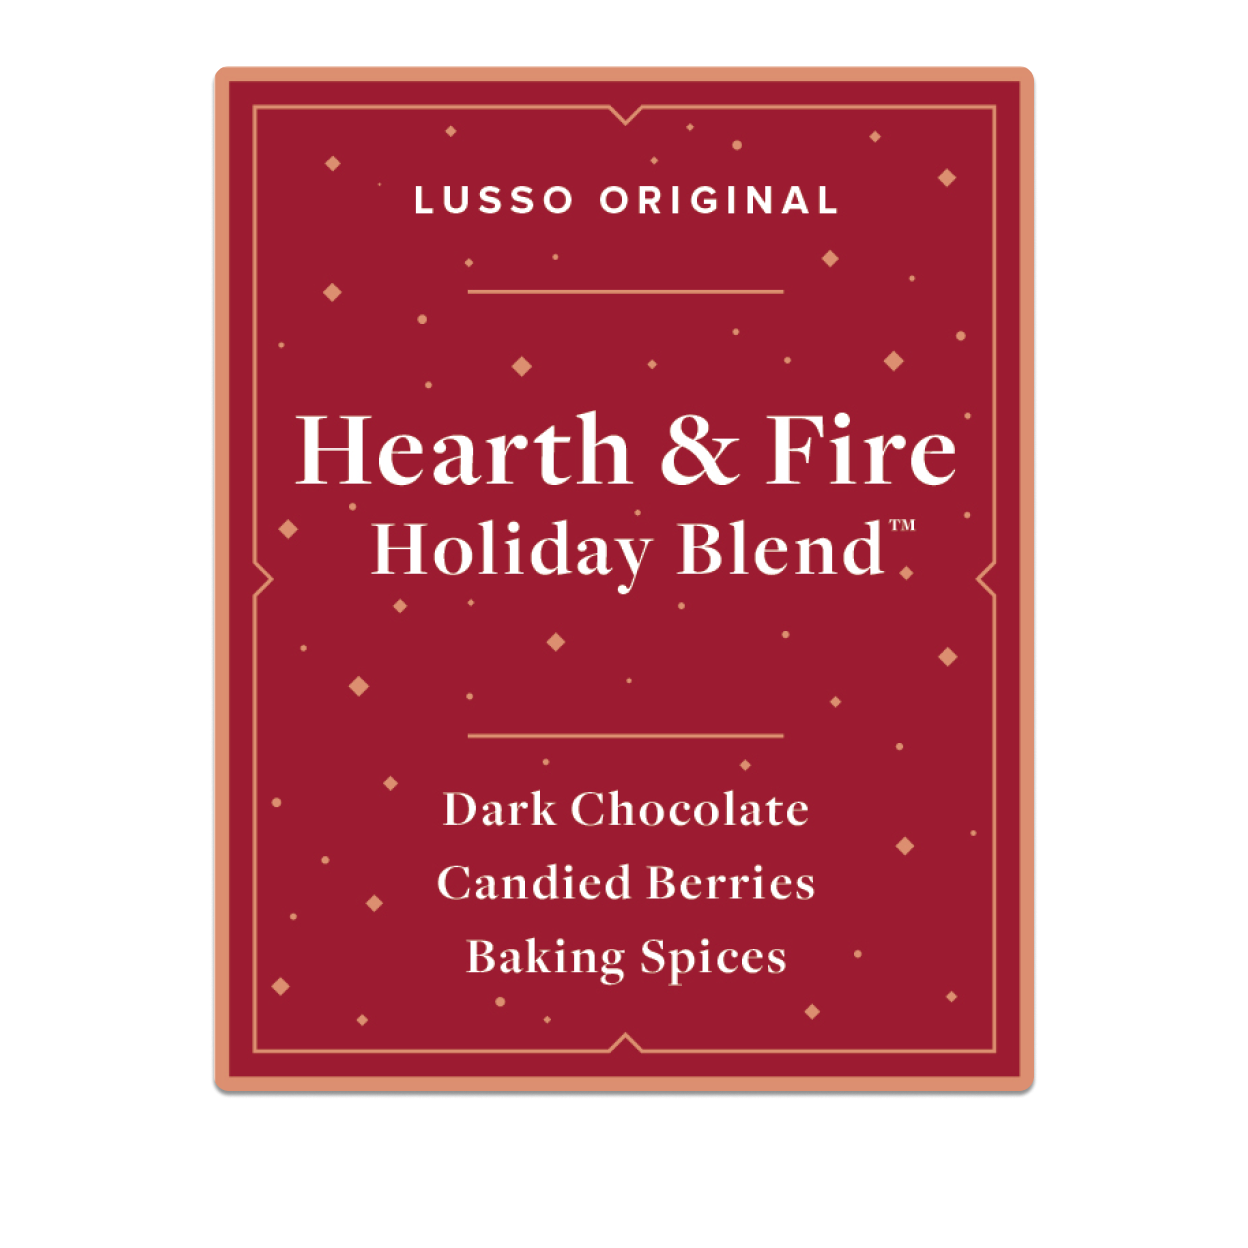 Hearth & Fire Holiday Blend